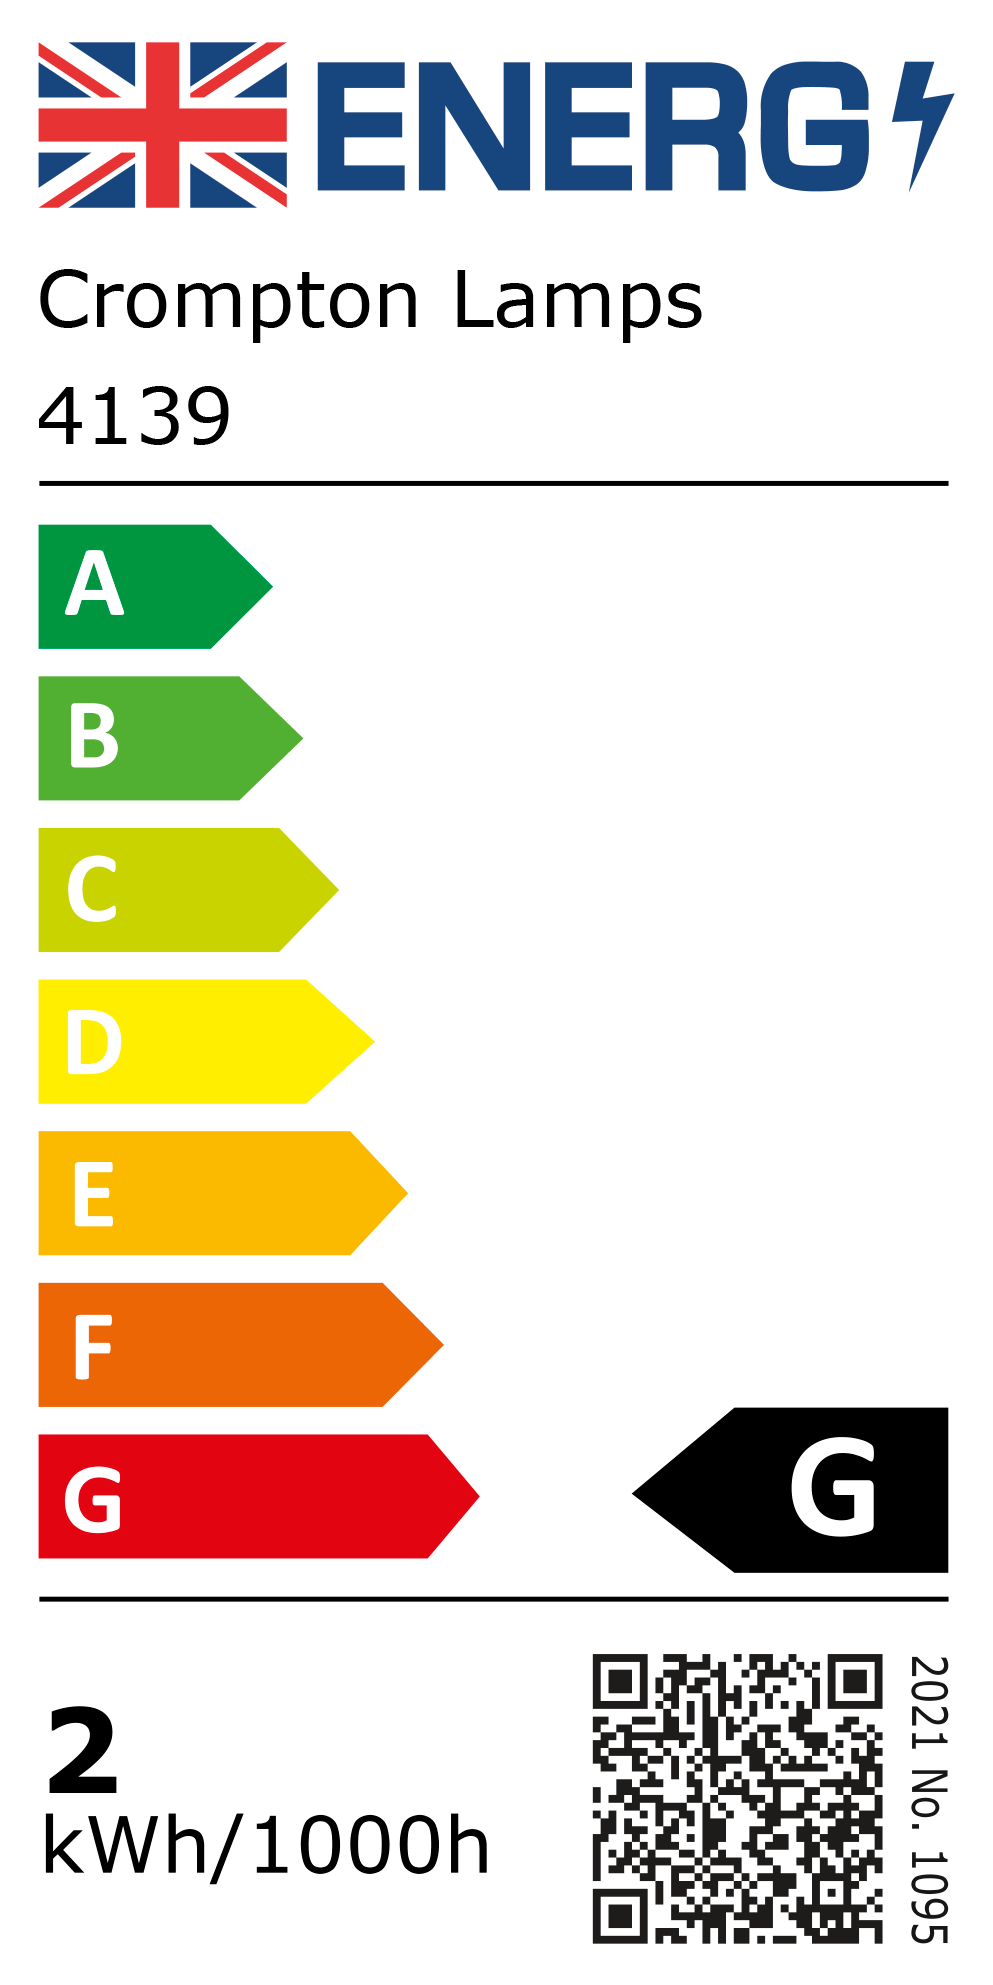 New 2021 Energy Rating Label: Stock Code 4139